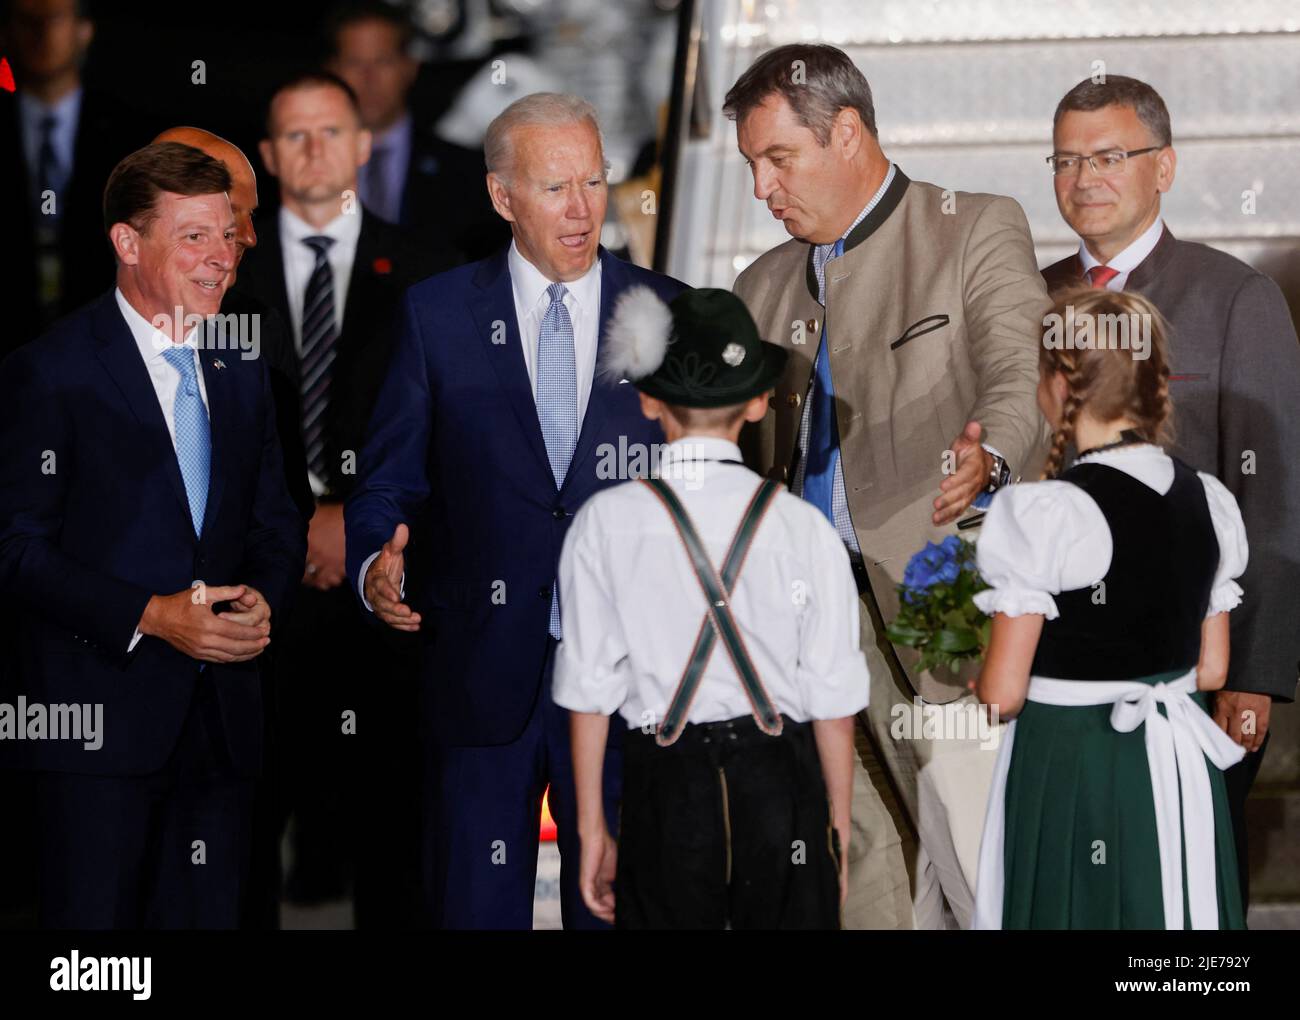 Children in traditional Bavarian clothes welcome U.S. President Joe Biden as he arrives for a G7 summit at Munich International Airport near Munich, Germany June 25, 2022. REUTERS/Michaela Rehle Stock Photo